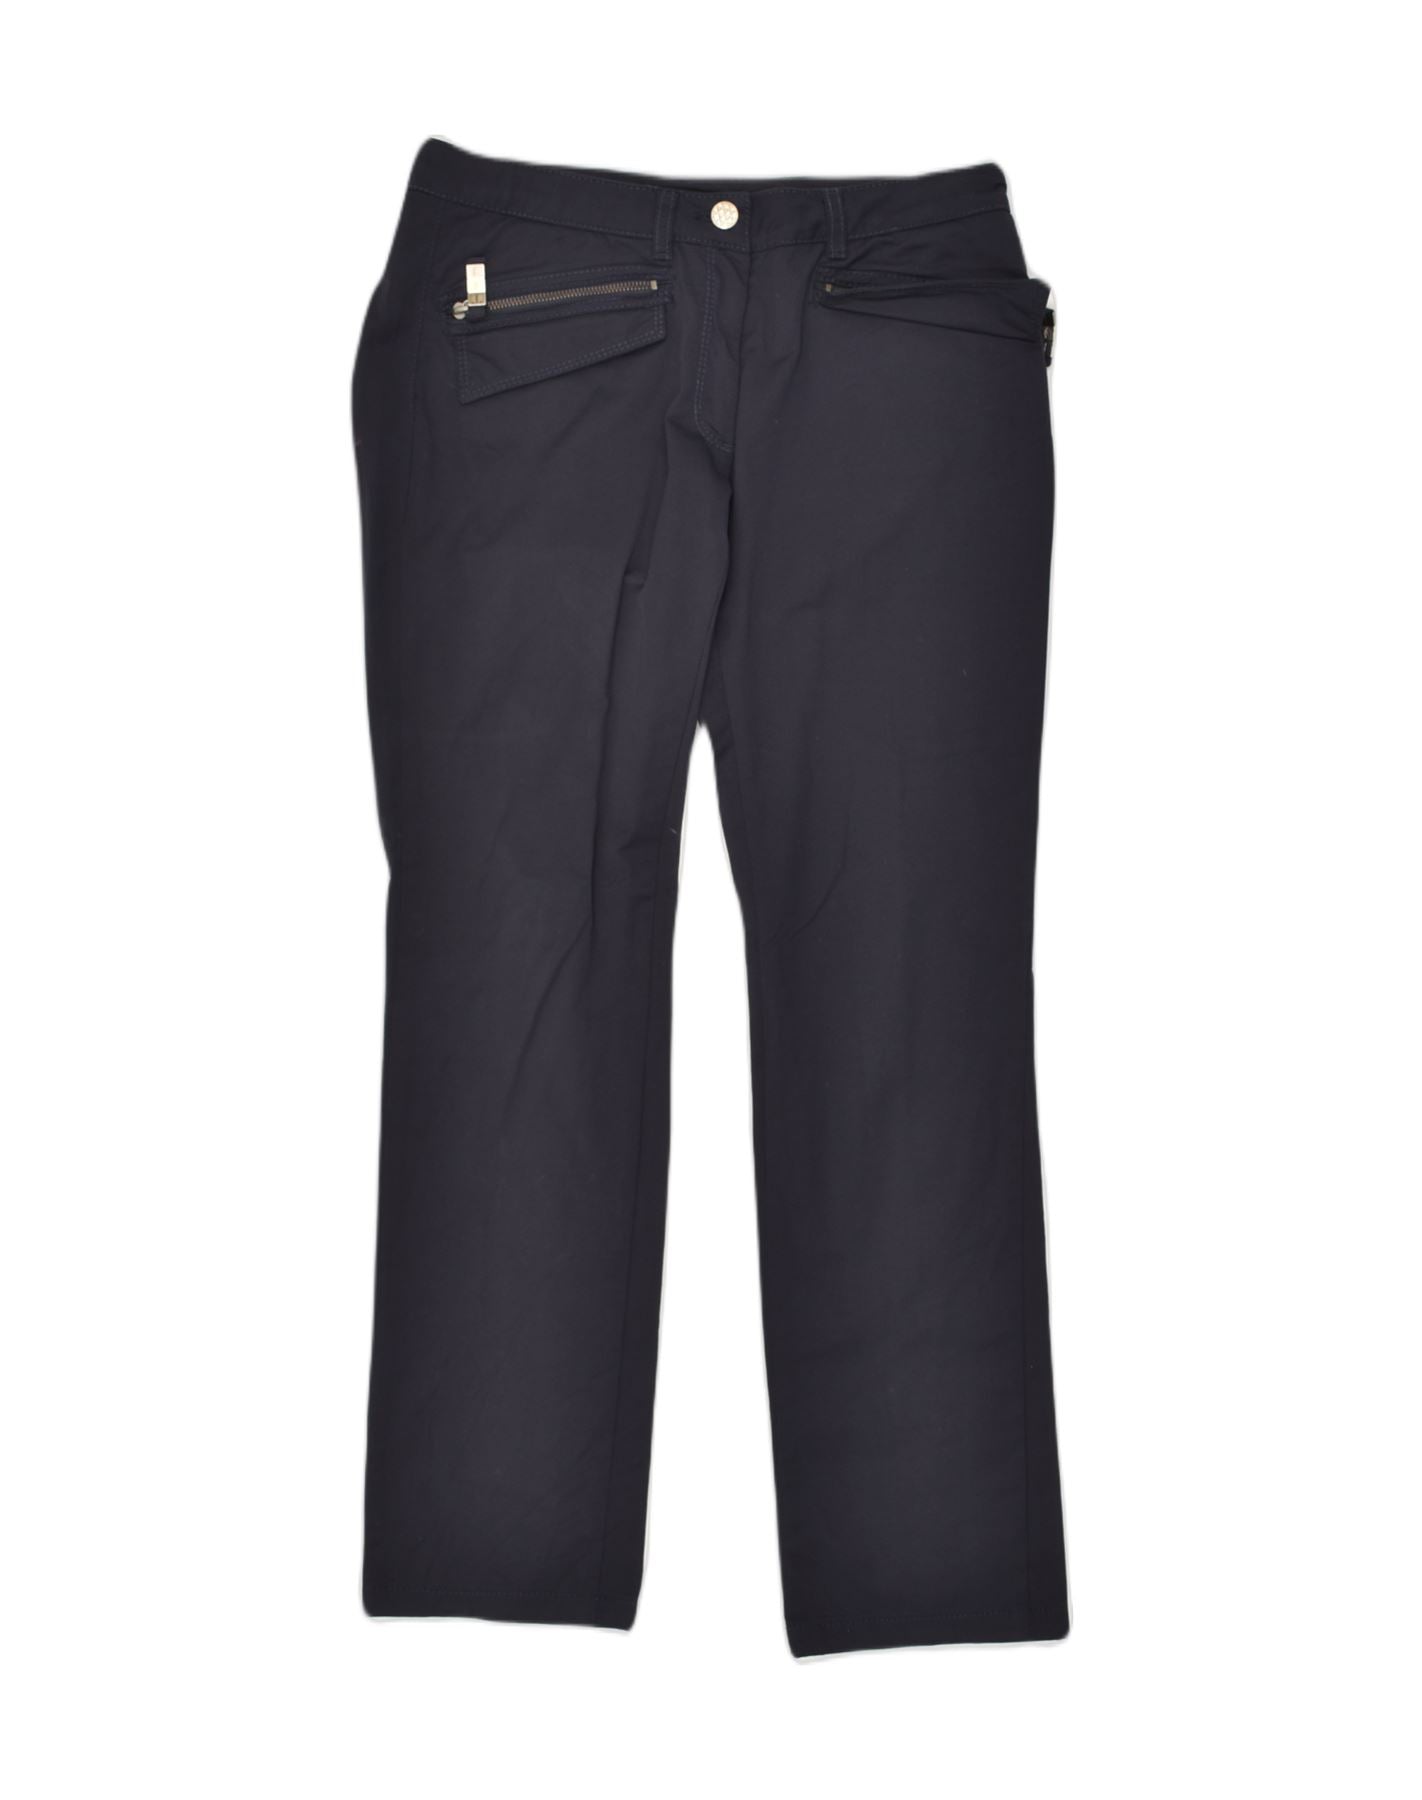 0125-1 Large Size Trousers Skirt Navy Blue TROUSERS